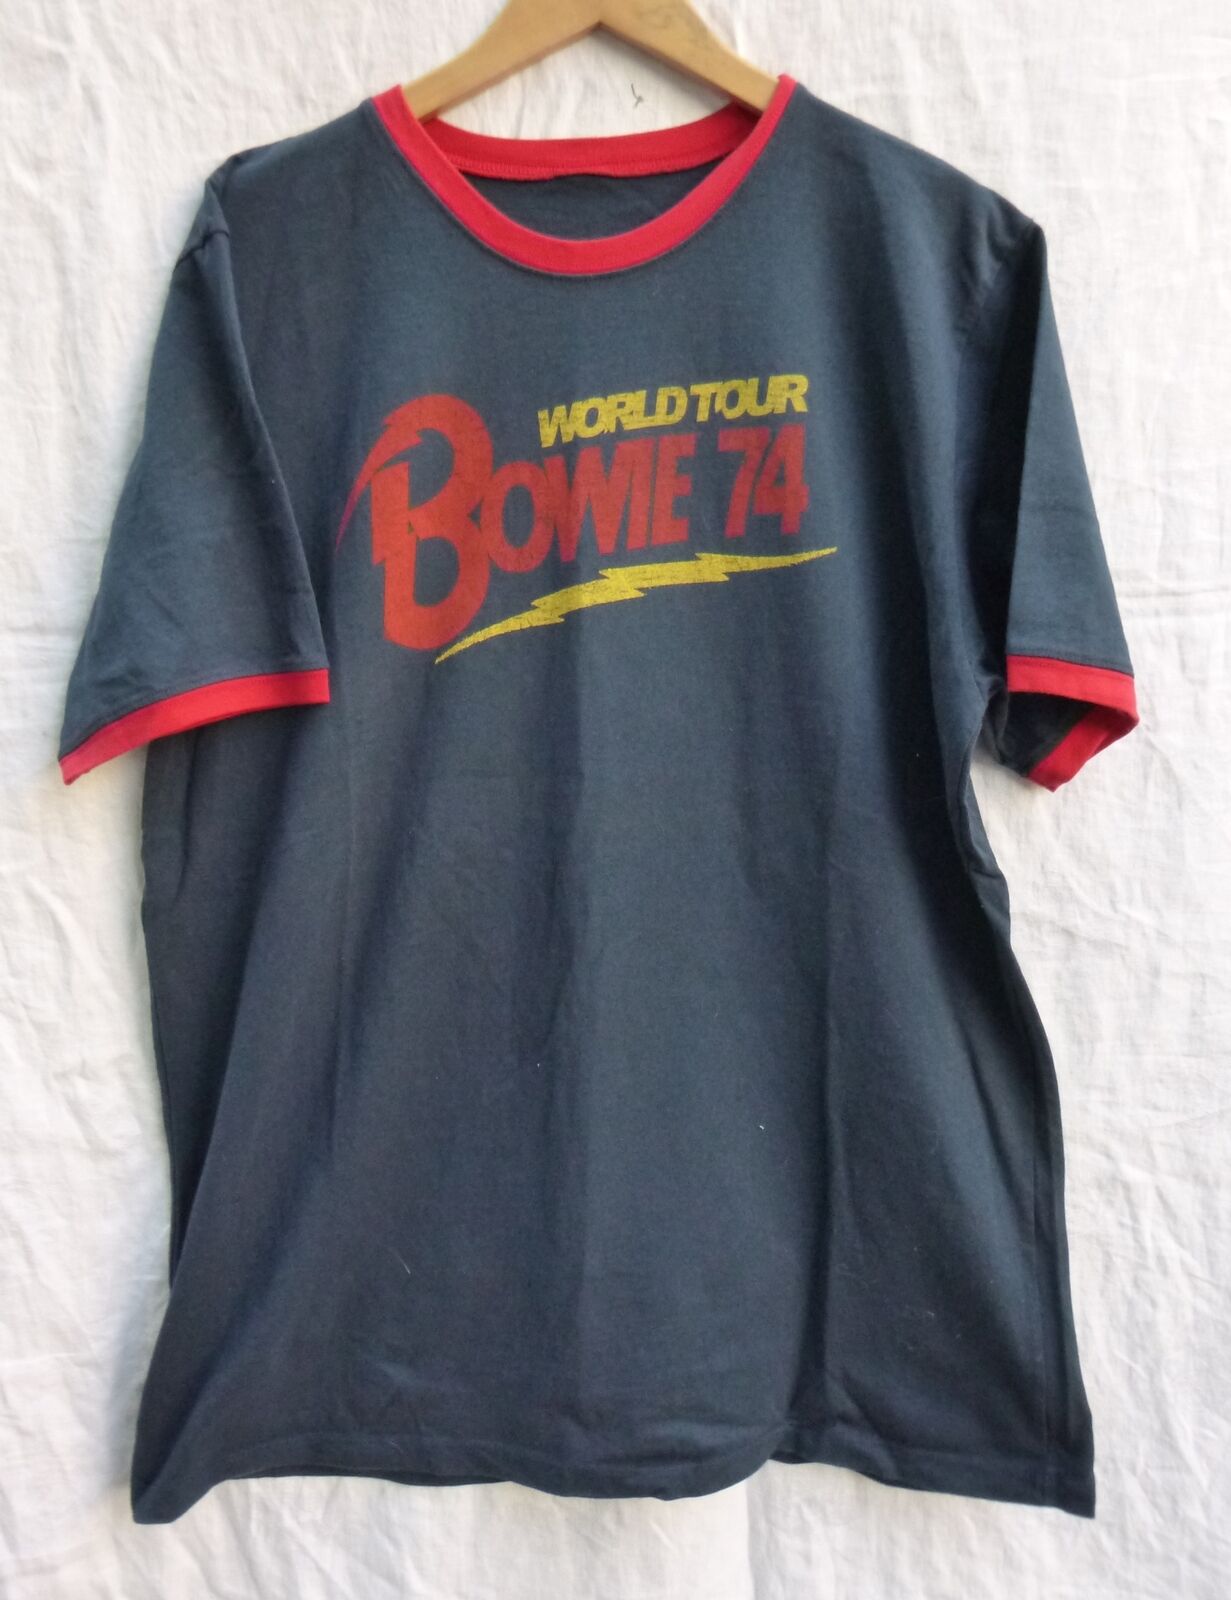 Bowie 74 World Tour   Band T Shirt No Tags Blue Red Yellow